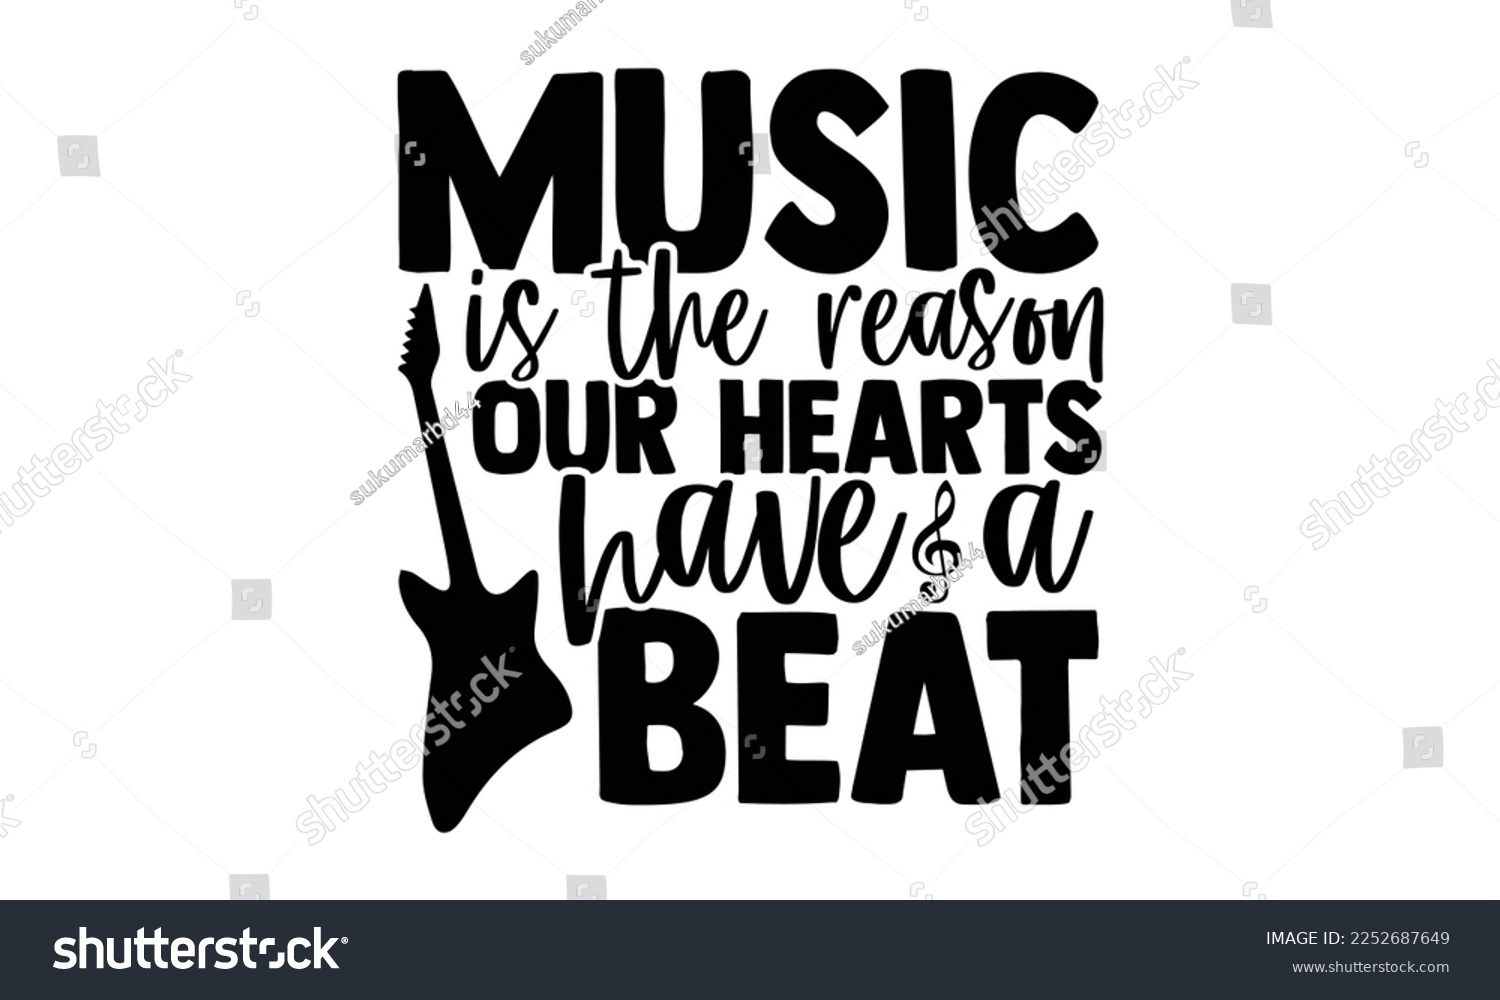 SVG of Music Is The Reason Our Hearts Have A Beat - Musician T-shirt Design, Calligraphy graphic design, SVG Files for Cutting, bag, cups, card, Handmade calligraphy quotes vector illustration. svg